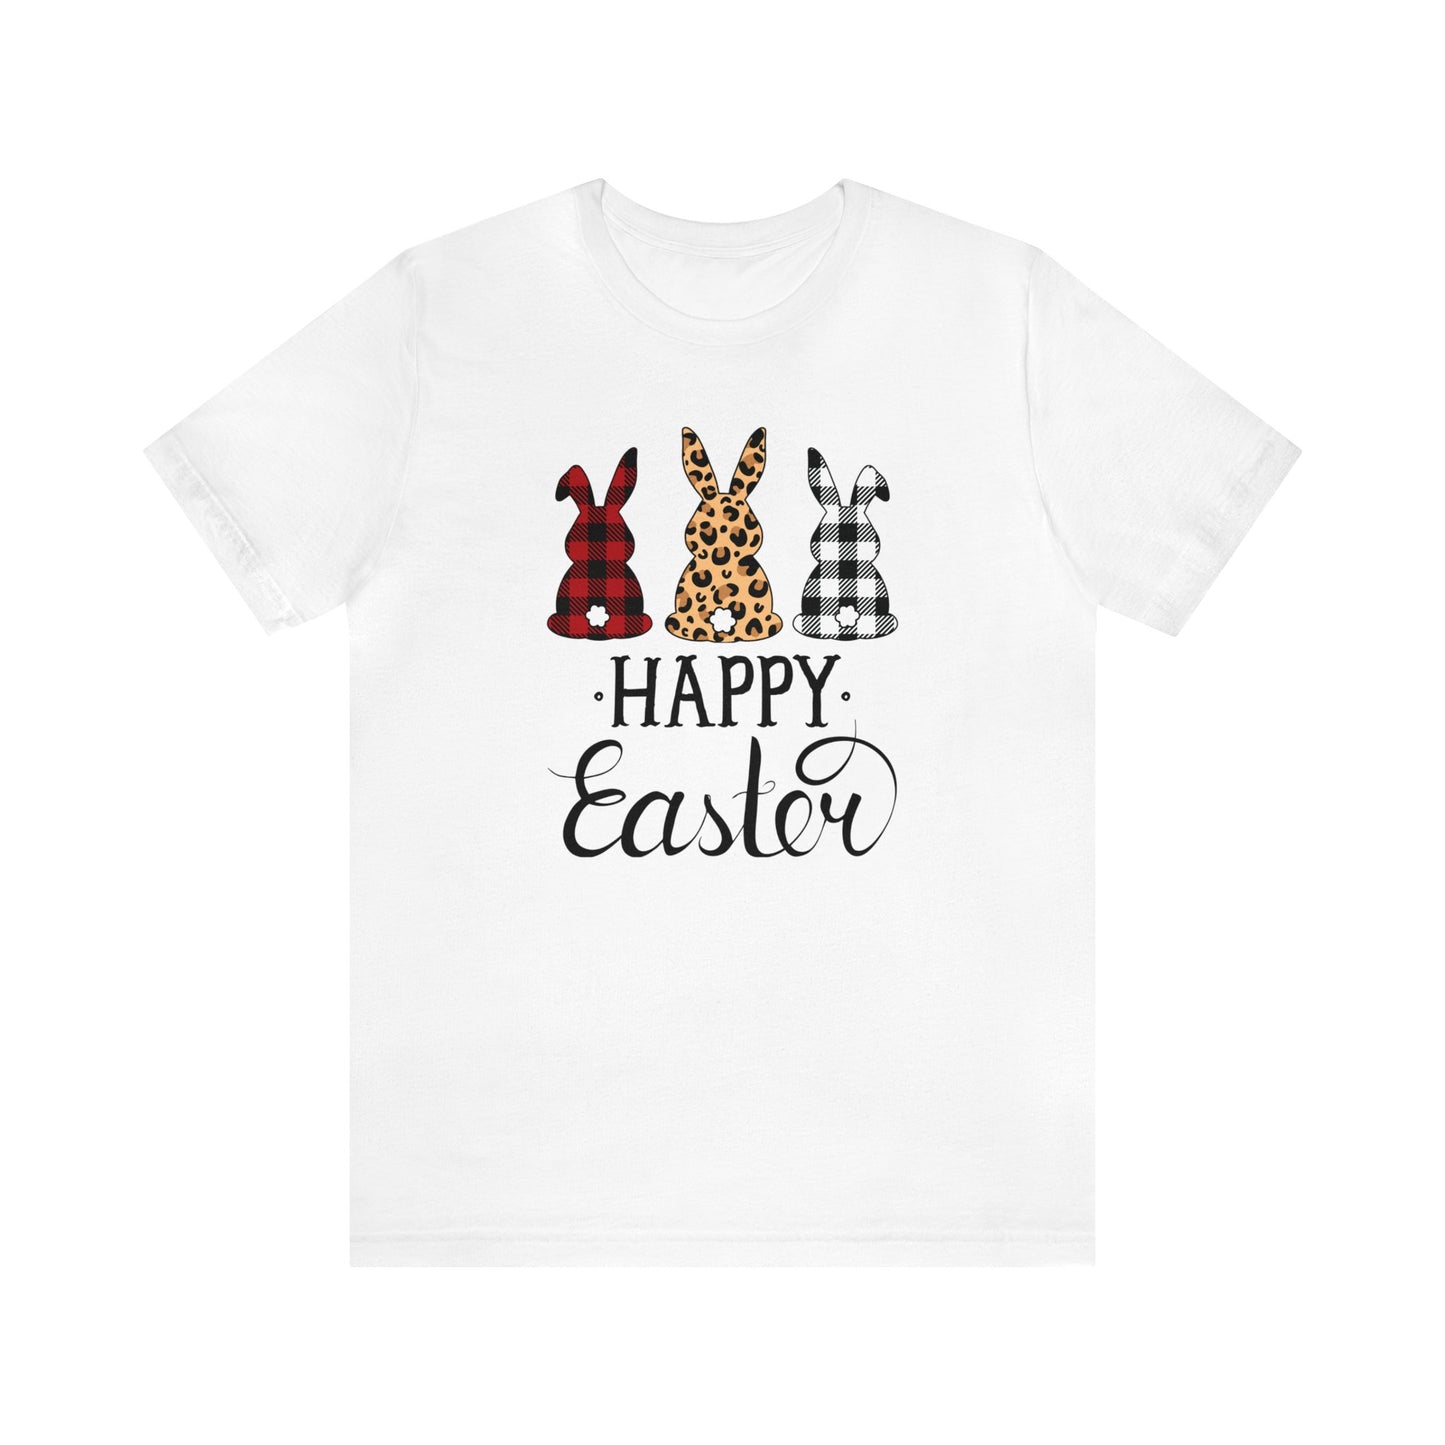 Cottontail T-Shirt For Bunny TShirt For Happy Easter T Shirt